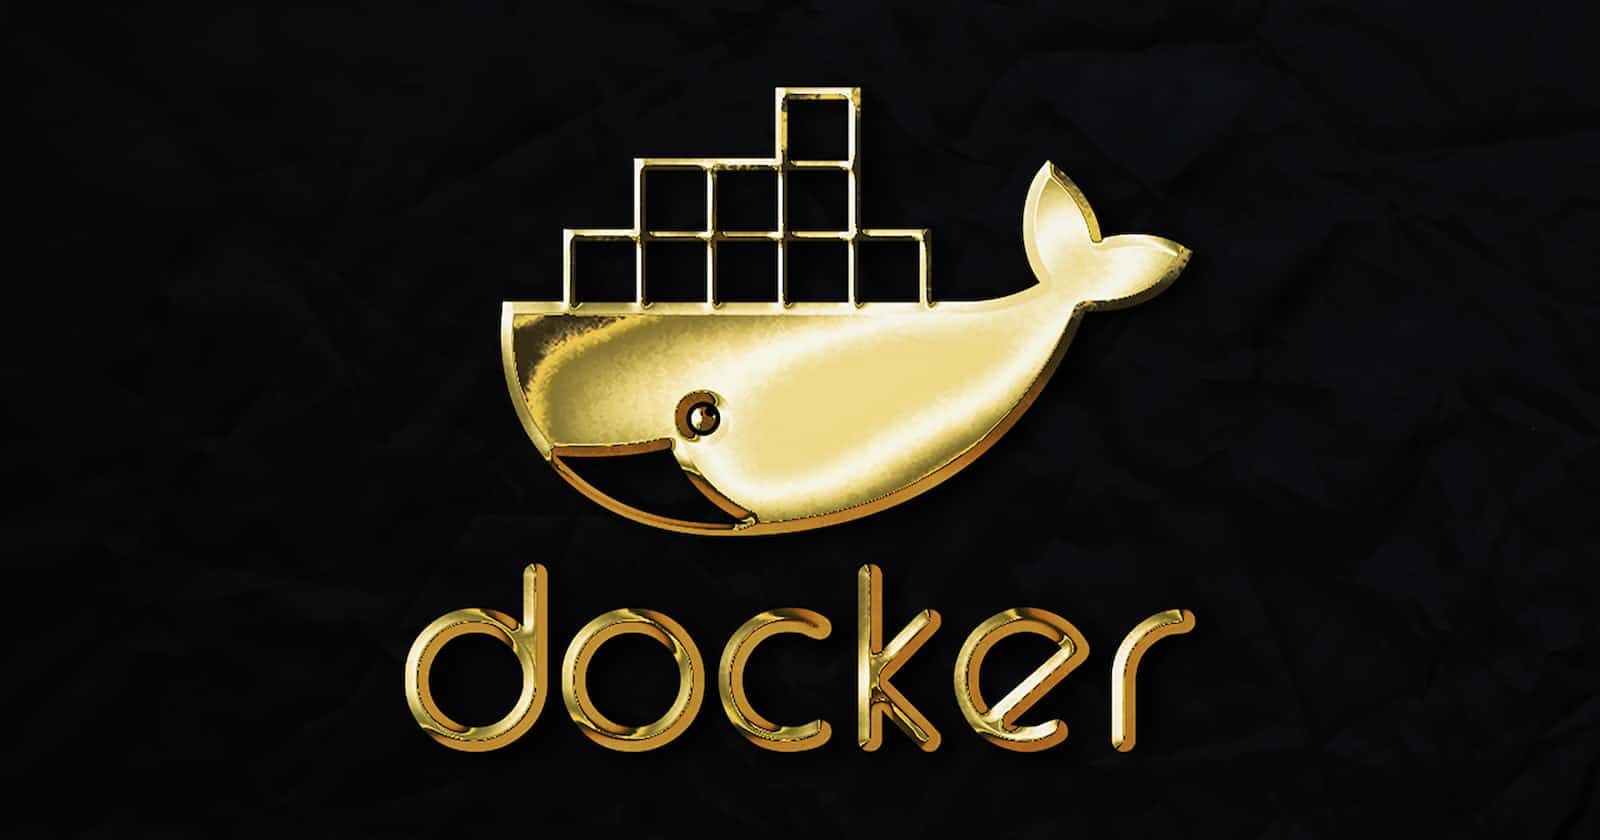 How to install Docker on Elementary OS 6.1 or any other Ubuntu-based Linux distribution via the terminal emulator?